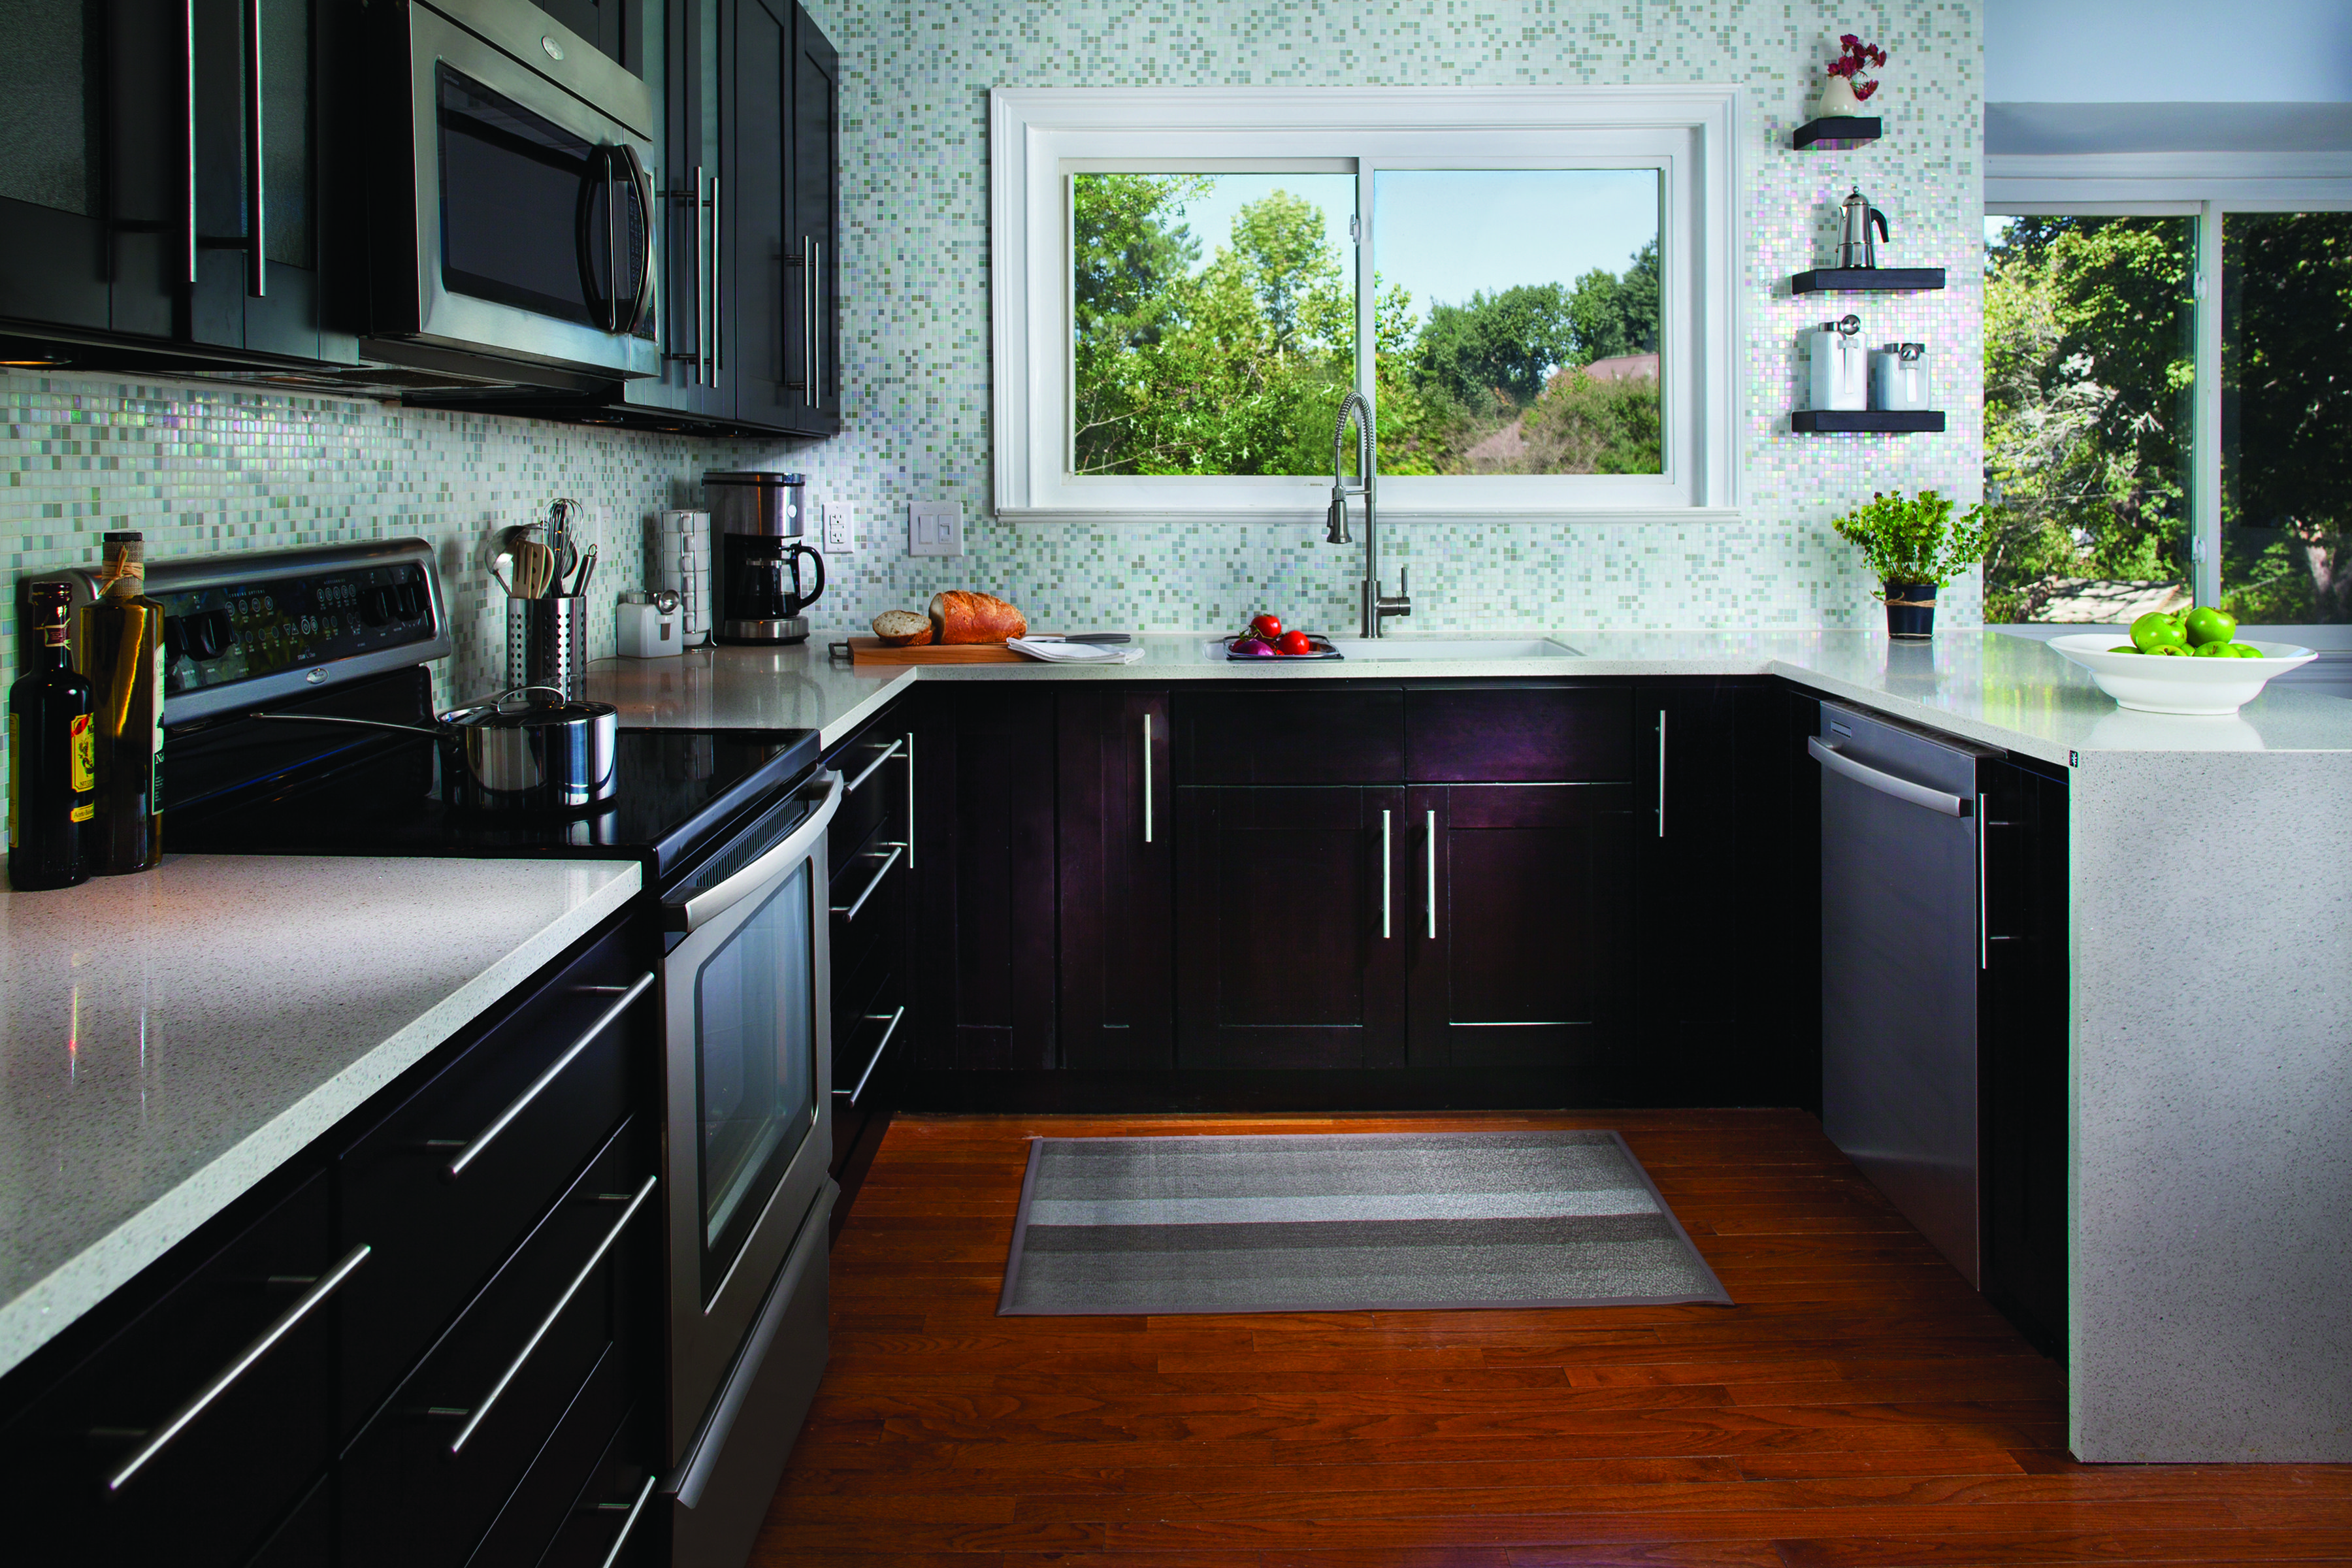 Reasons Why Cabinet Refacing Is The Better Option To Bring Life To Your Kitchen